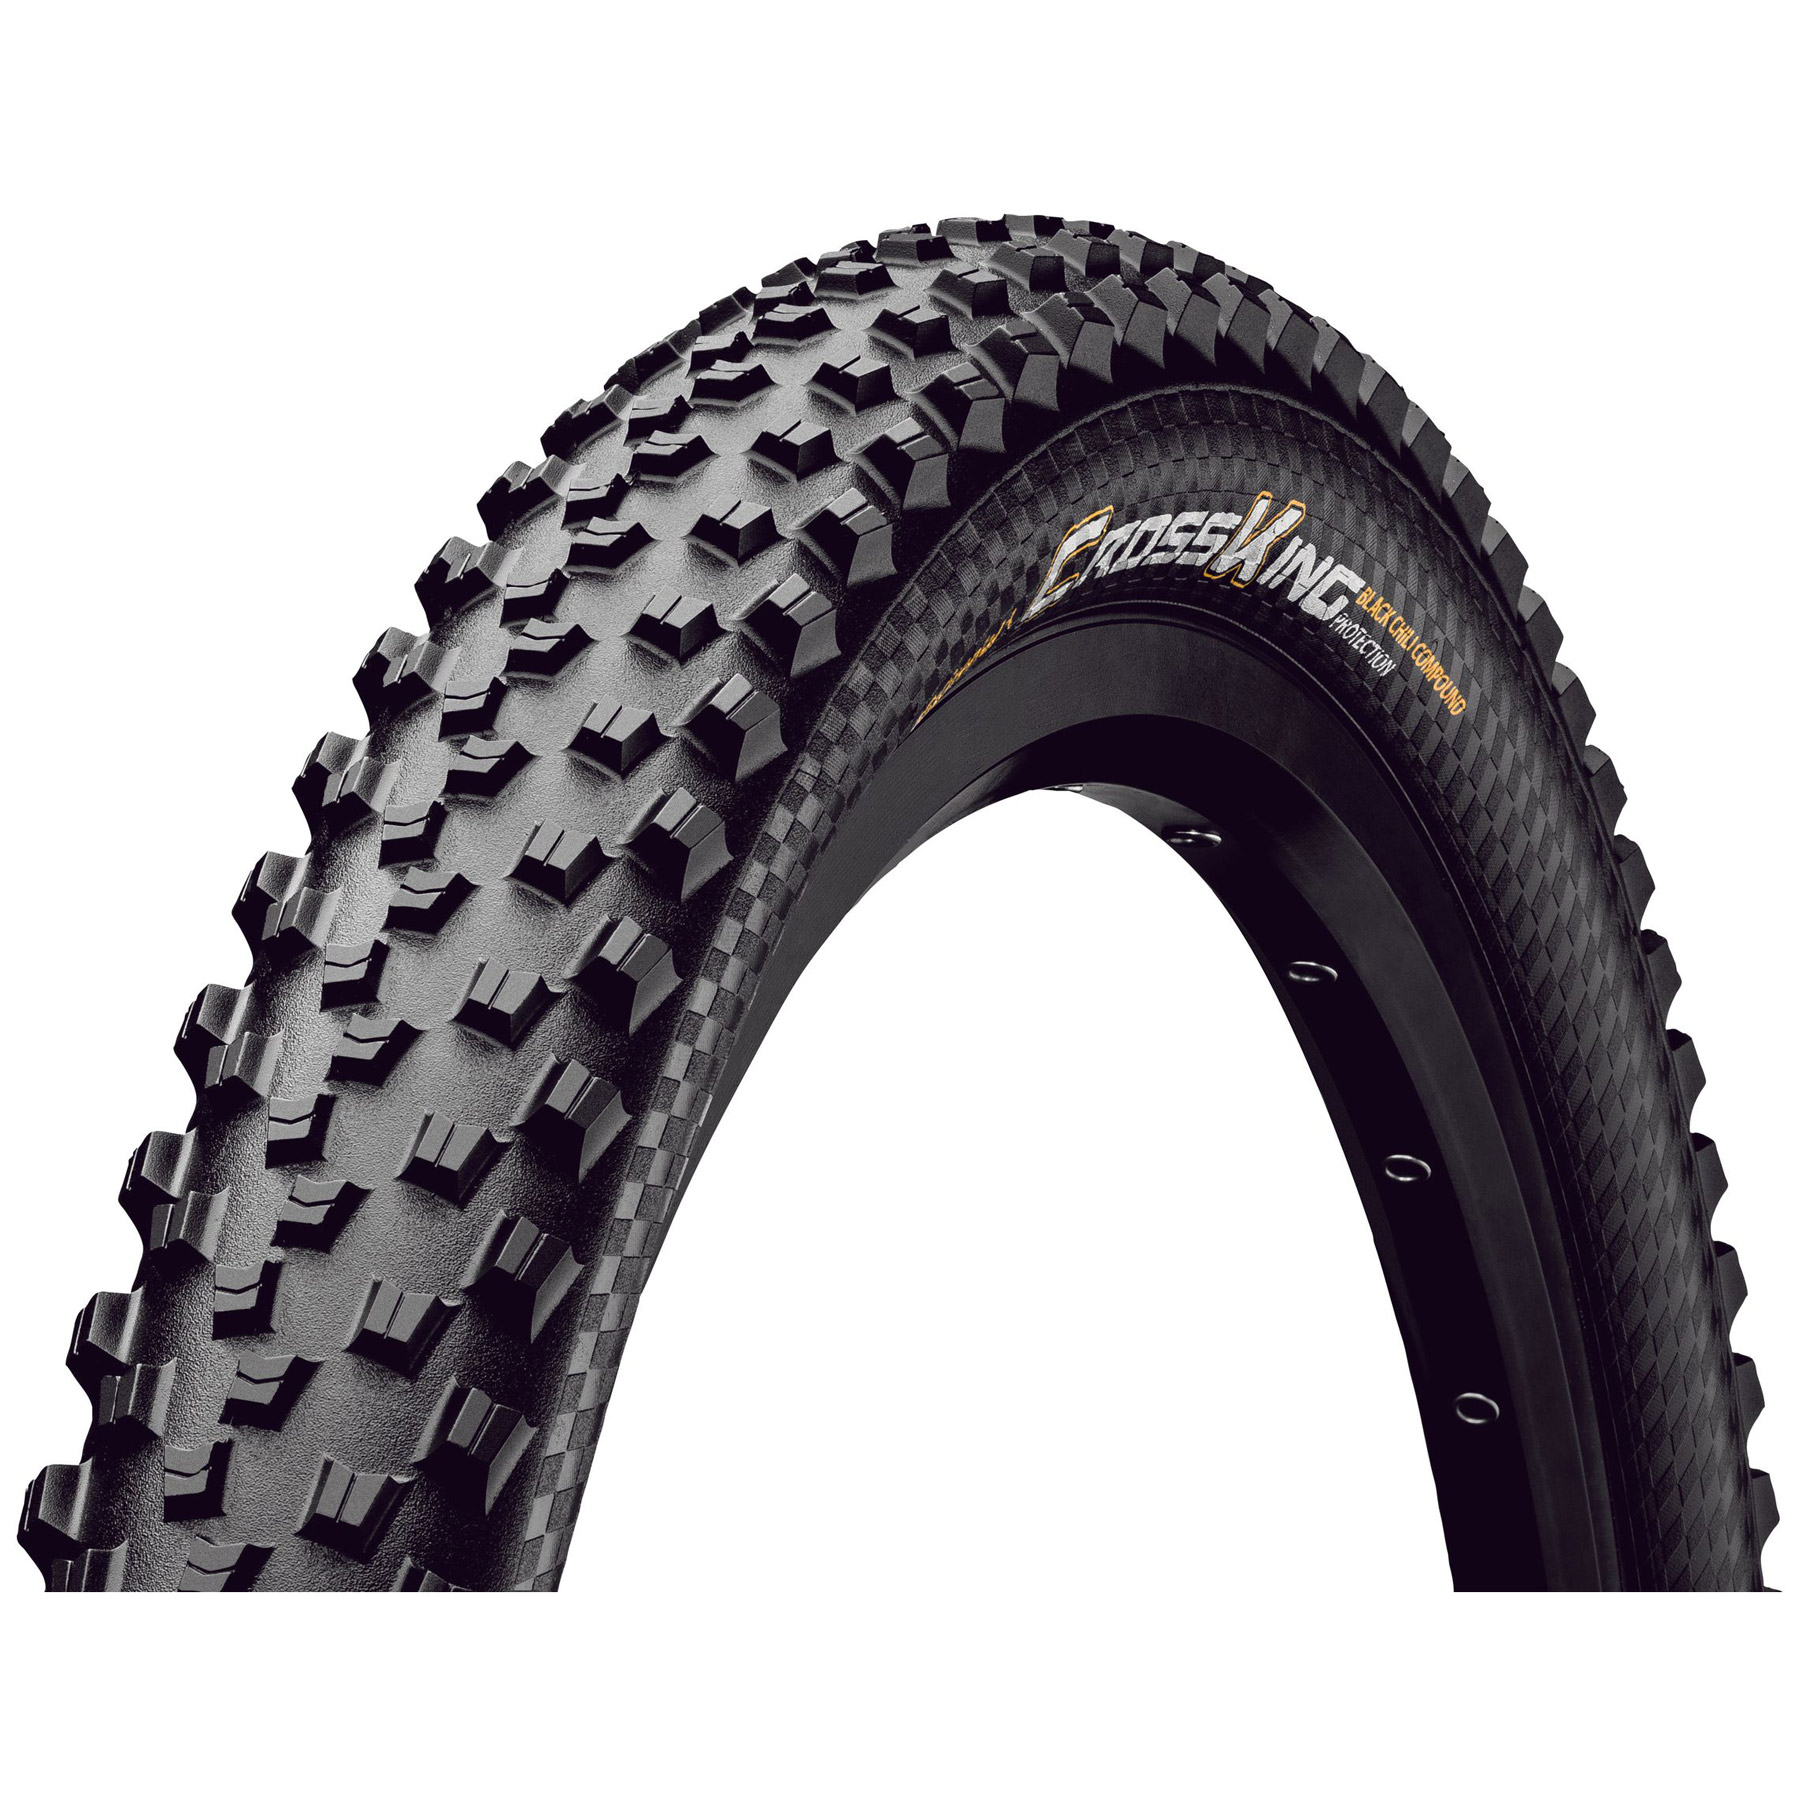 Image of Continental Cross King ProTection Folding Tire - 27.5x2.20" - black